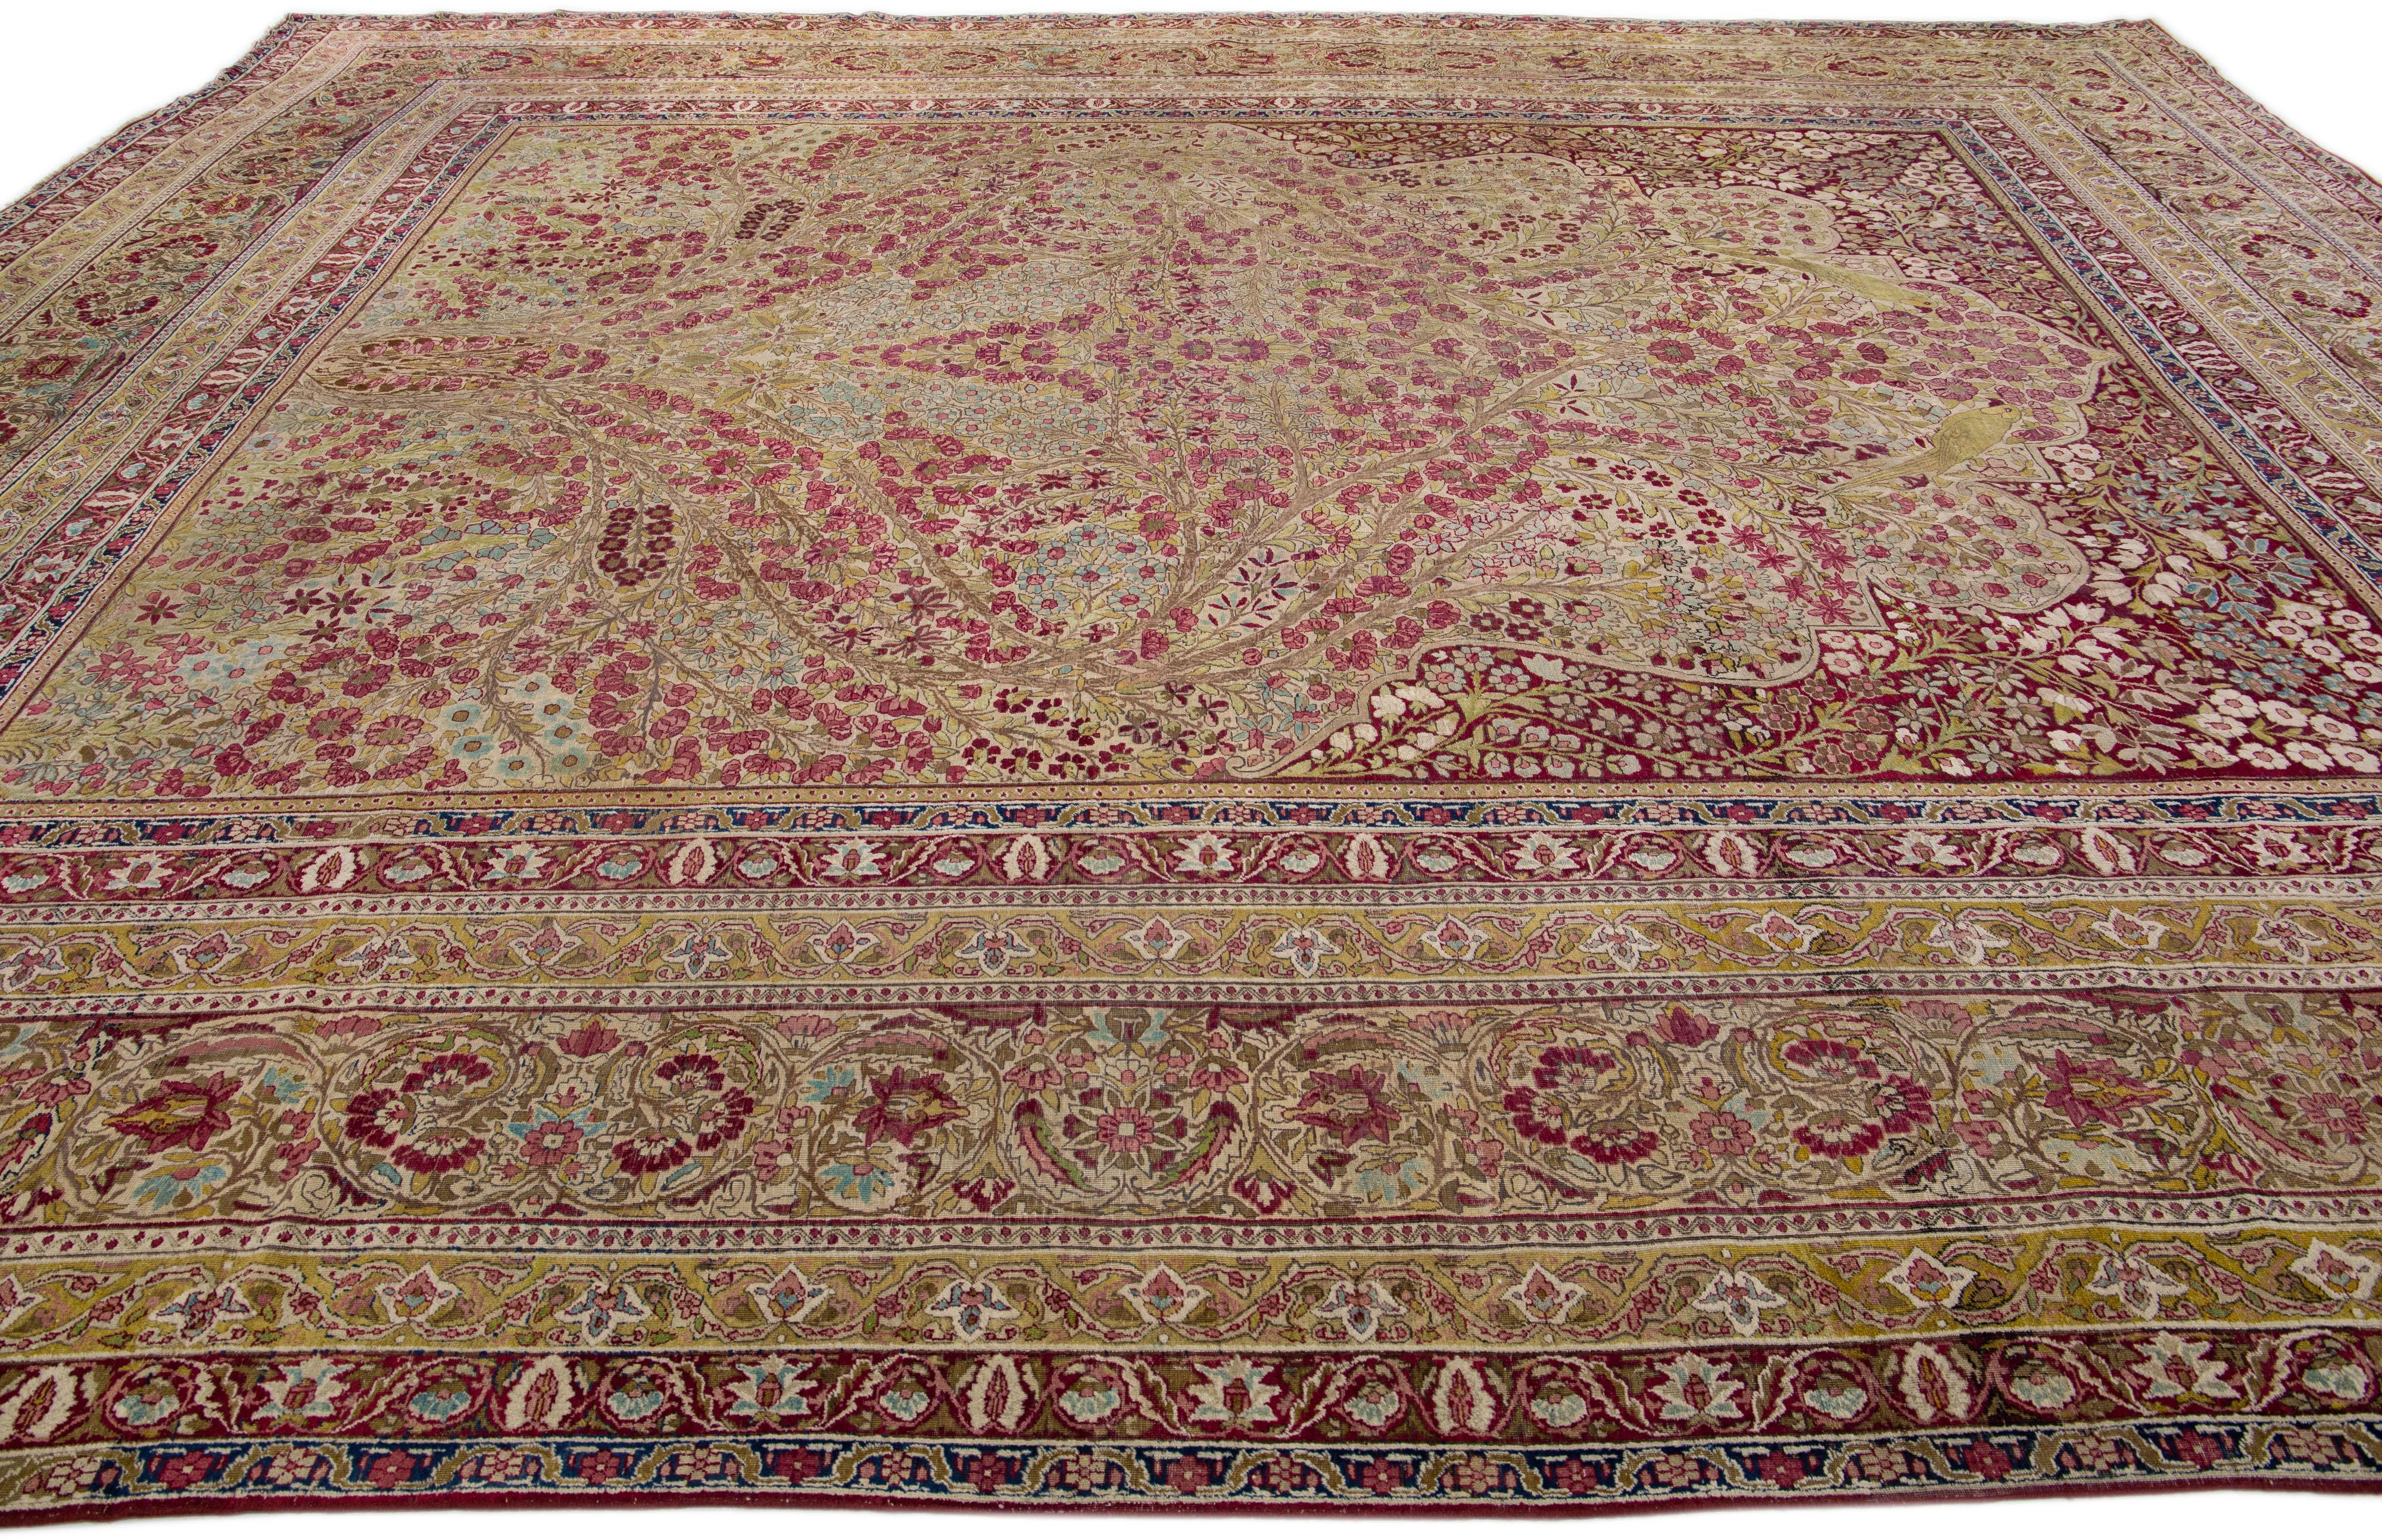 20th Century Antique Kerman Handmade Rose Persian Wool Rug with Allover Floral Motif For Sale